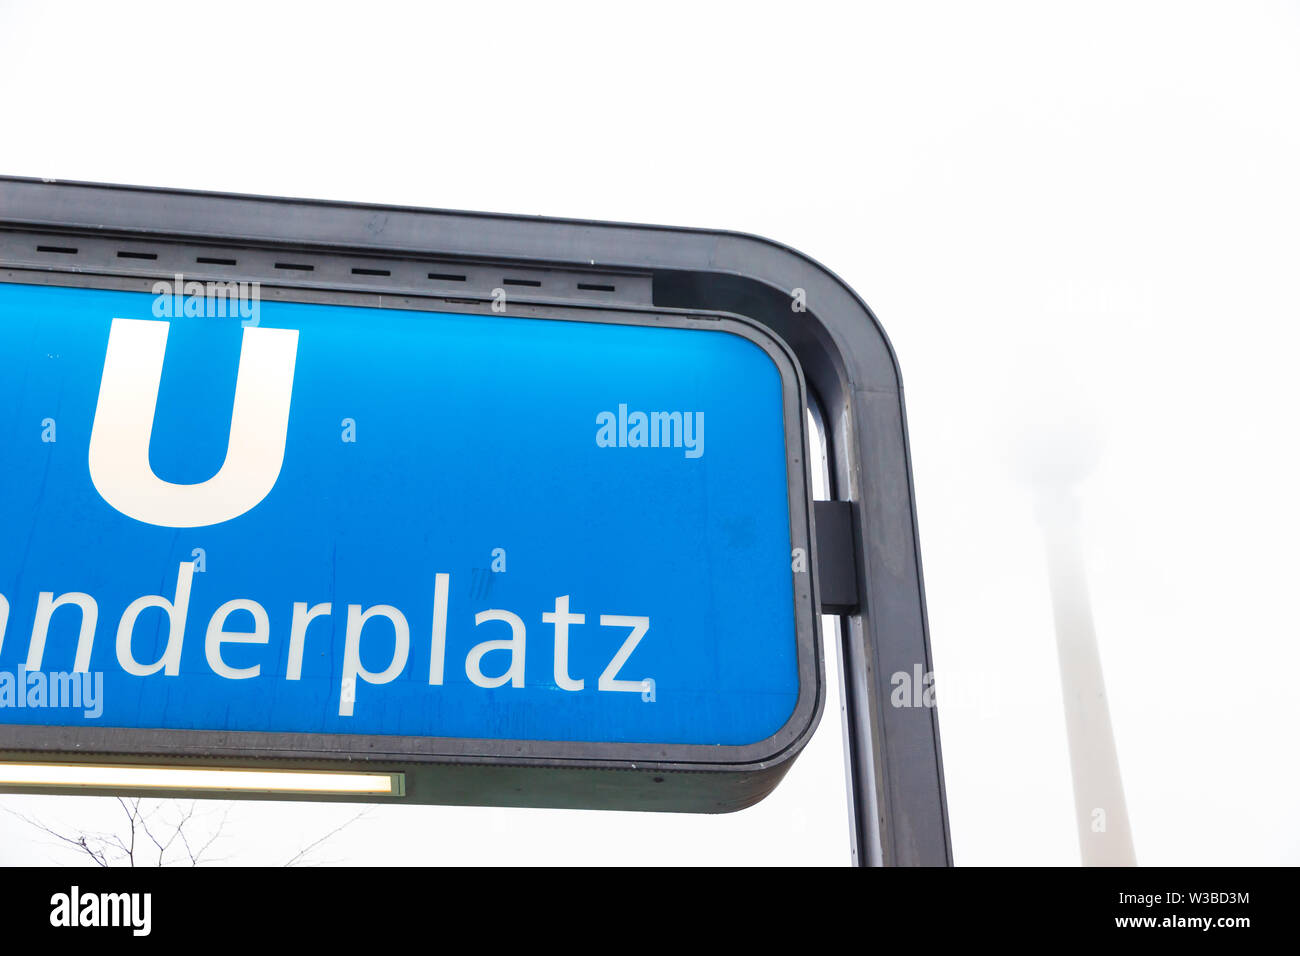 Berlin, Germany - December 21, 2017. Alexanderplatz subway station sign in winter in a foggy day Stock Photo